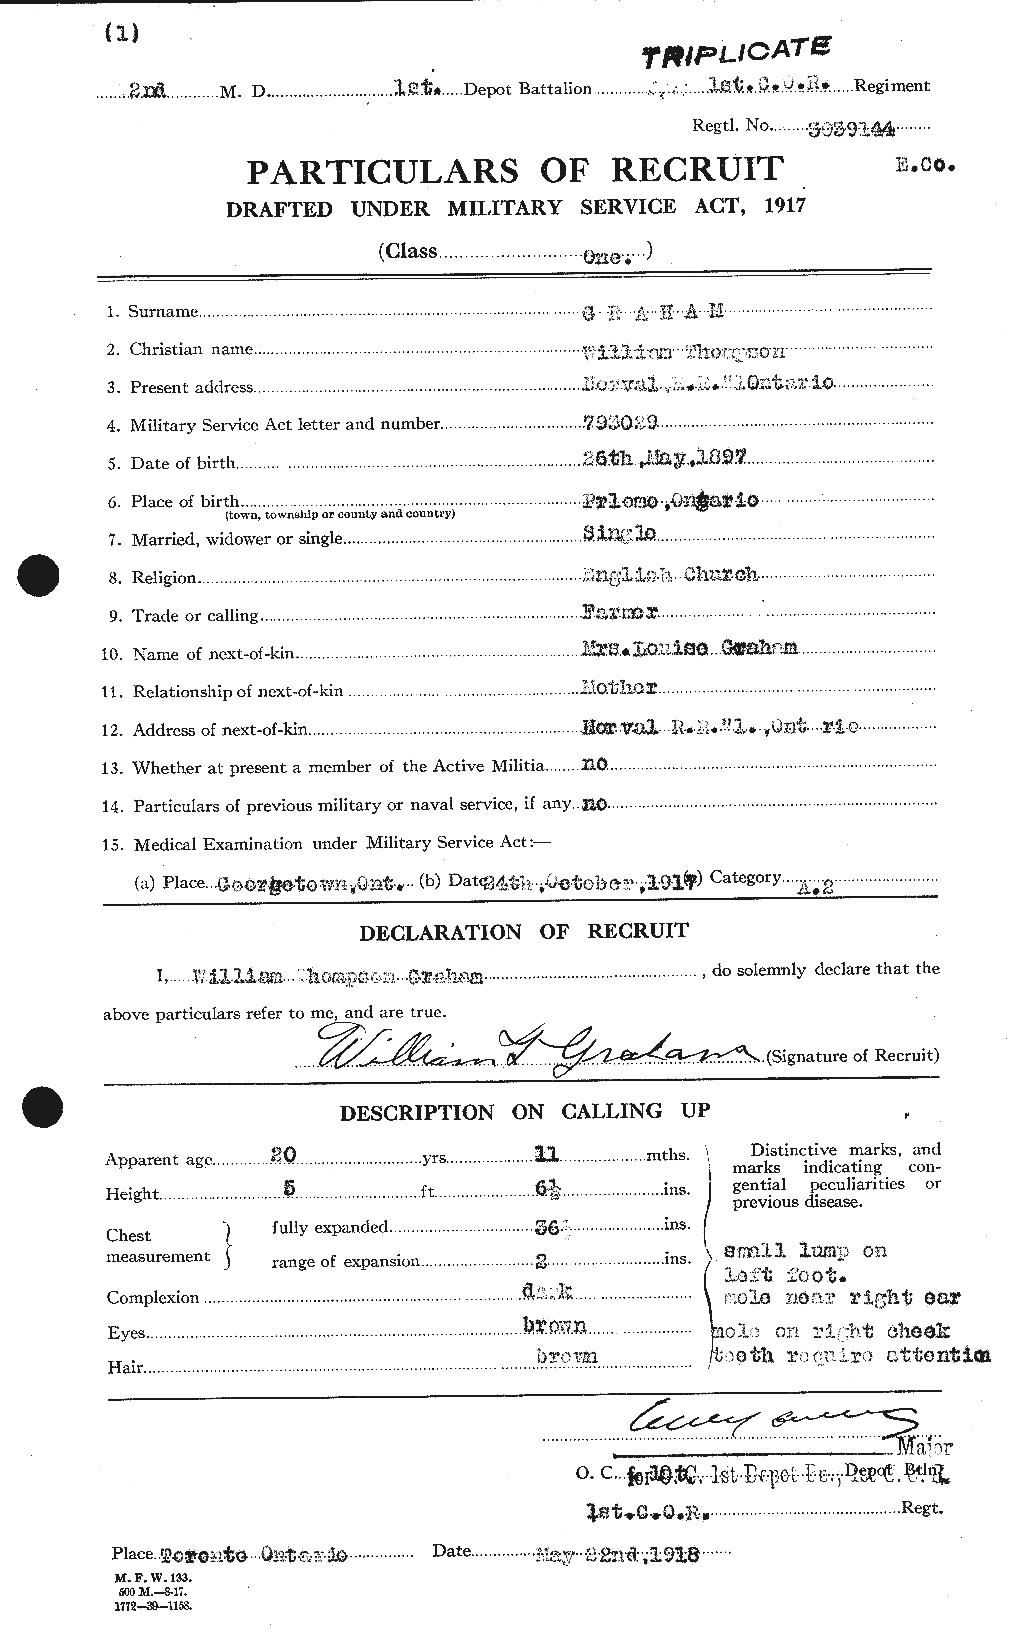 Personnel Records of the First World War - CEF 358043a